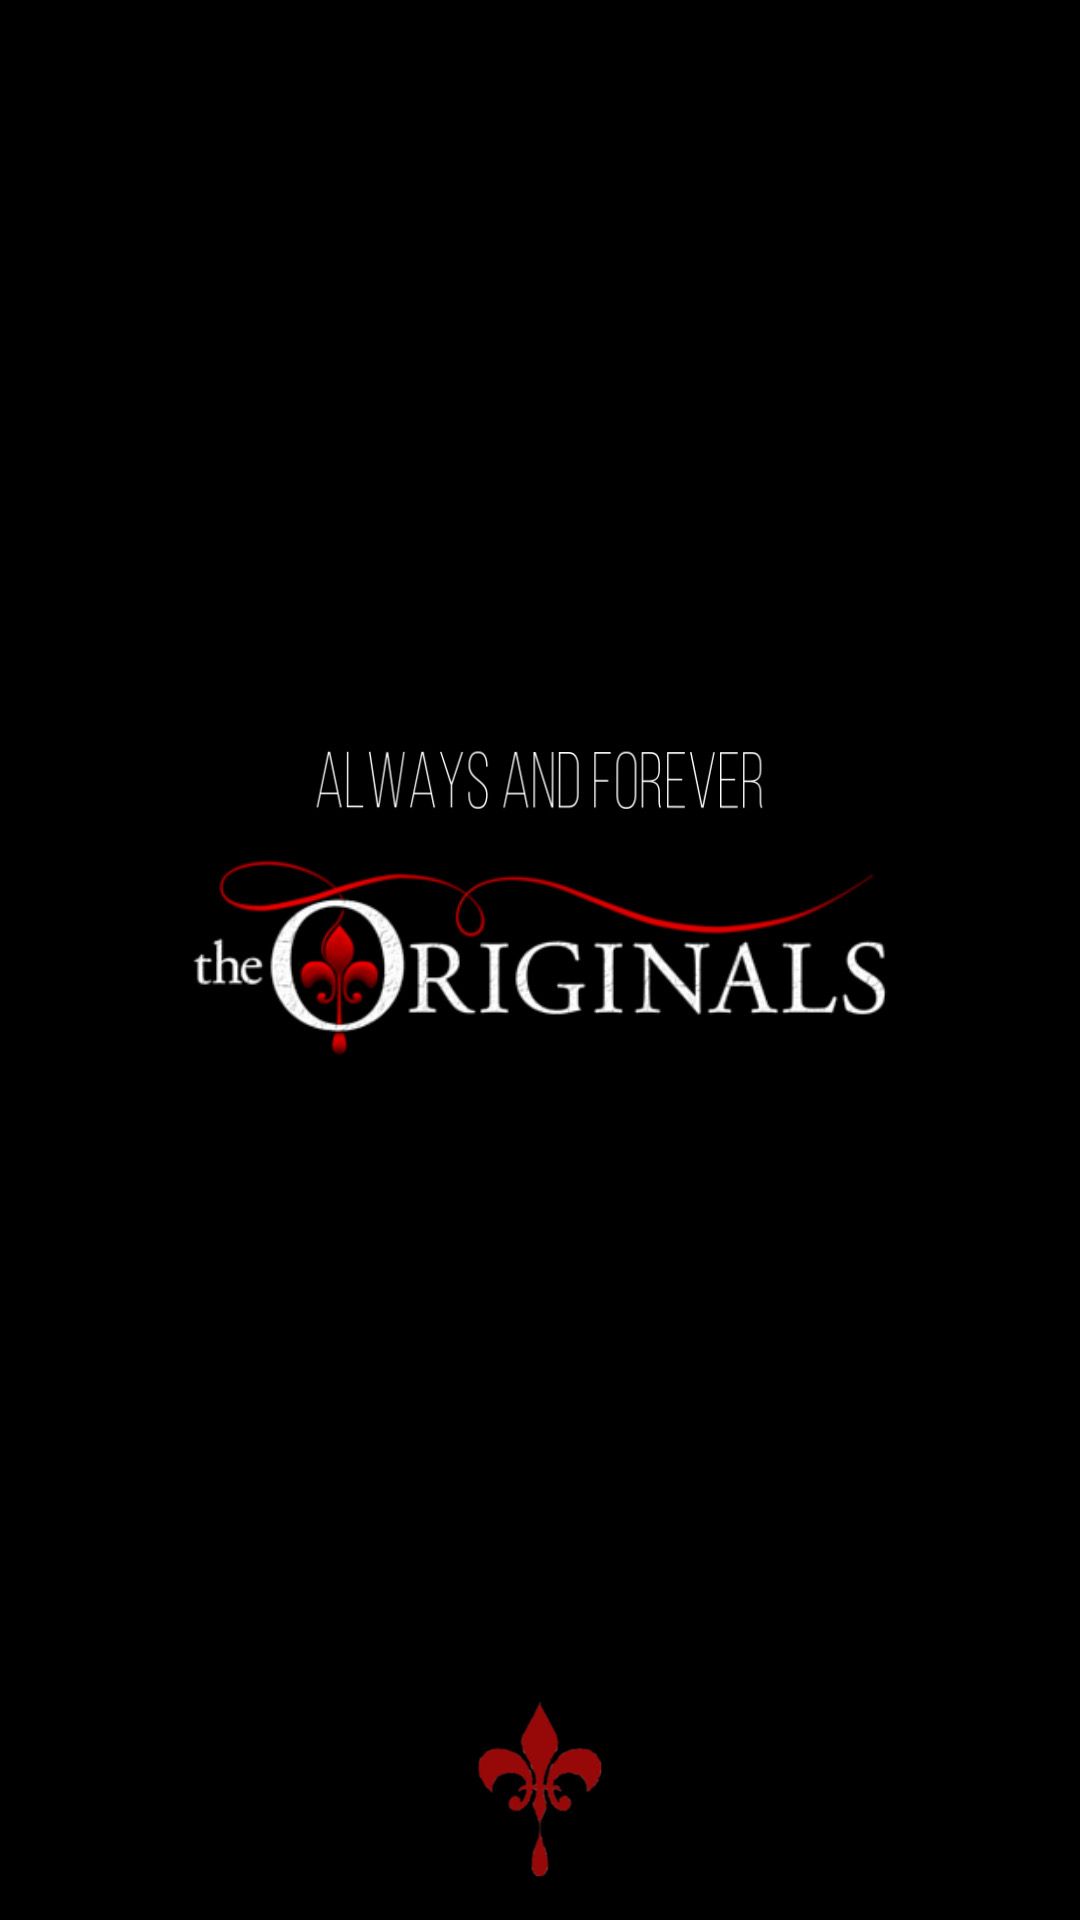 The originals. Always and forever. The vampire diaries logo, Vampire diaries wallpaper, The originals tv show